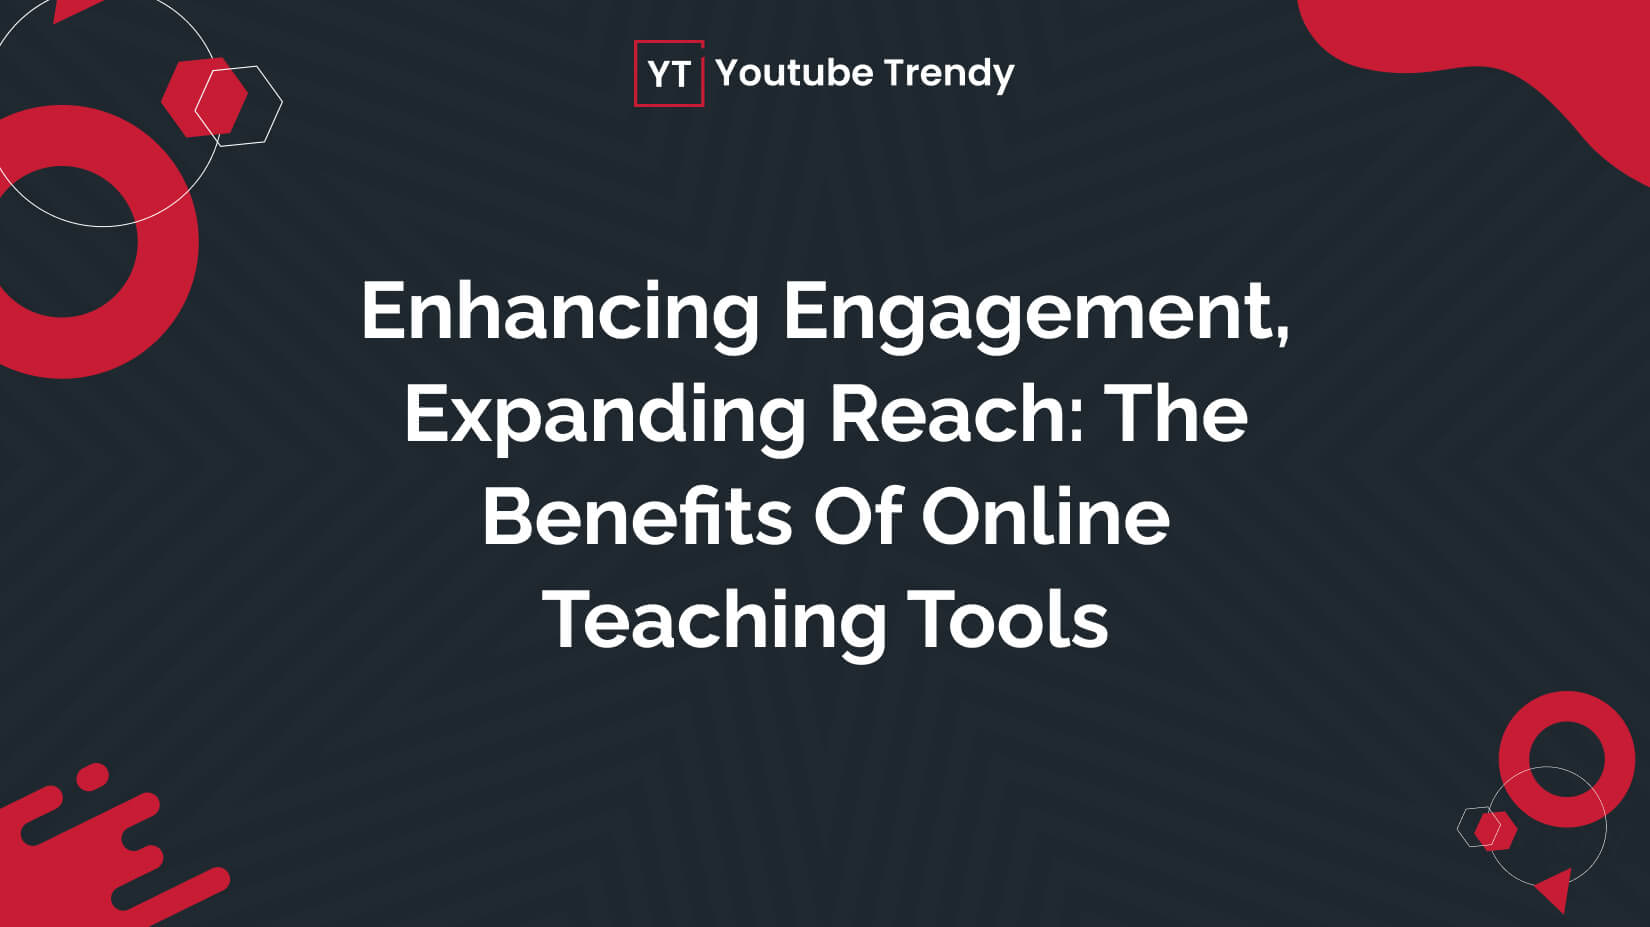 Enhancing Engagement, Expanding Reach: The Benefits of Online Teaching Tools